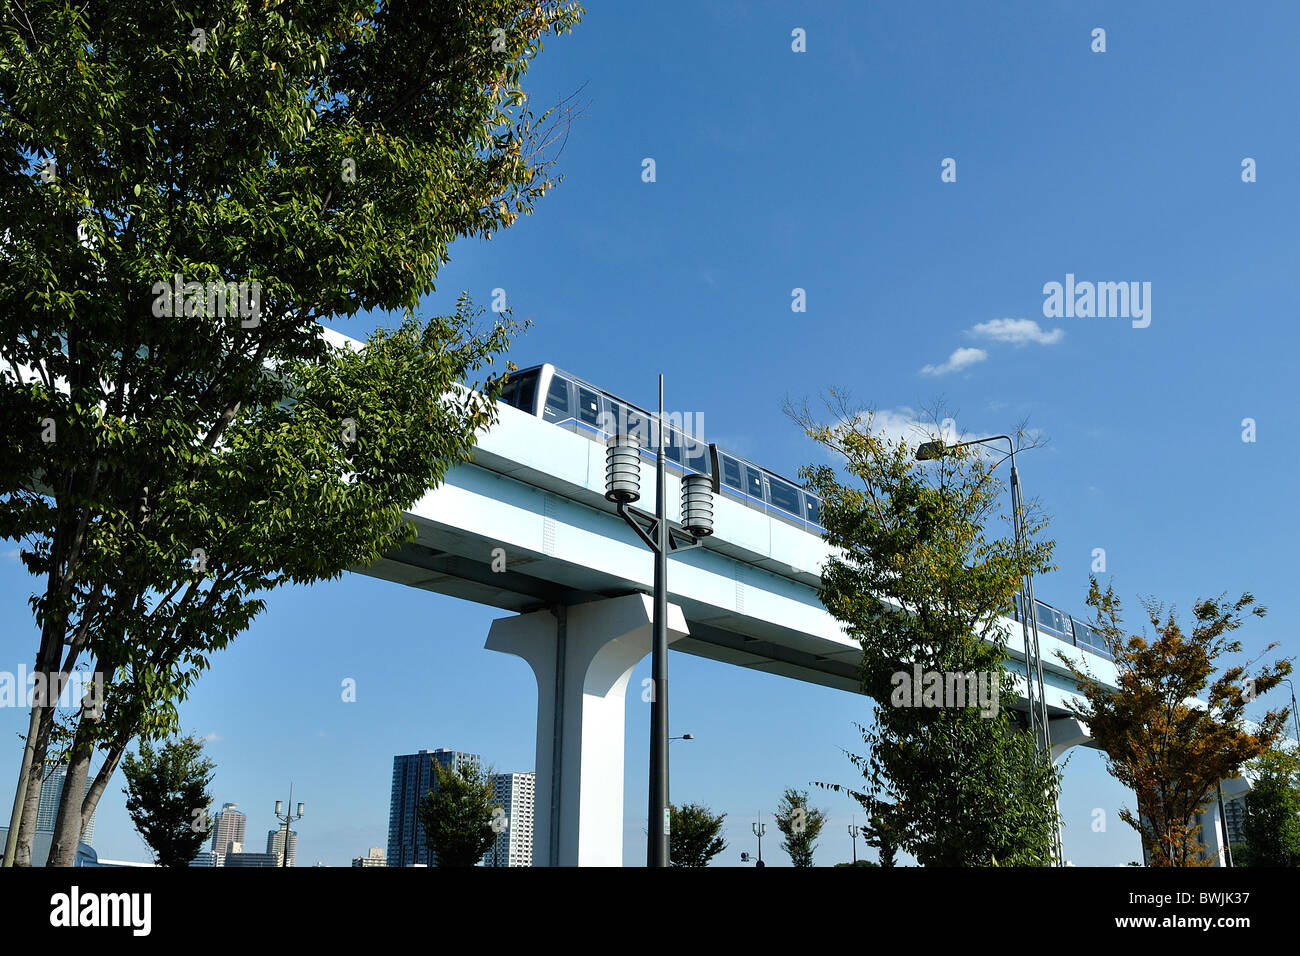 Train passing by on elevated track of Yurikamome railway system in Tokyo (Japan) Stock Photo